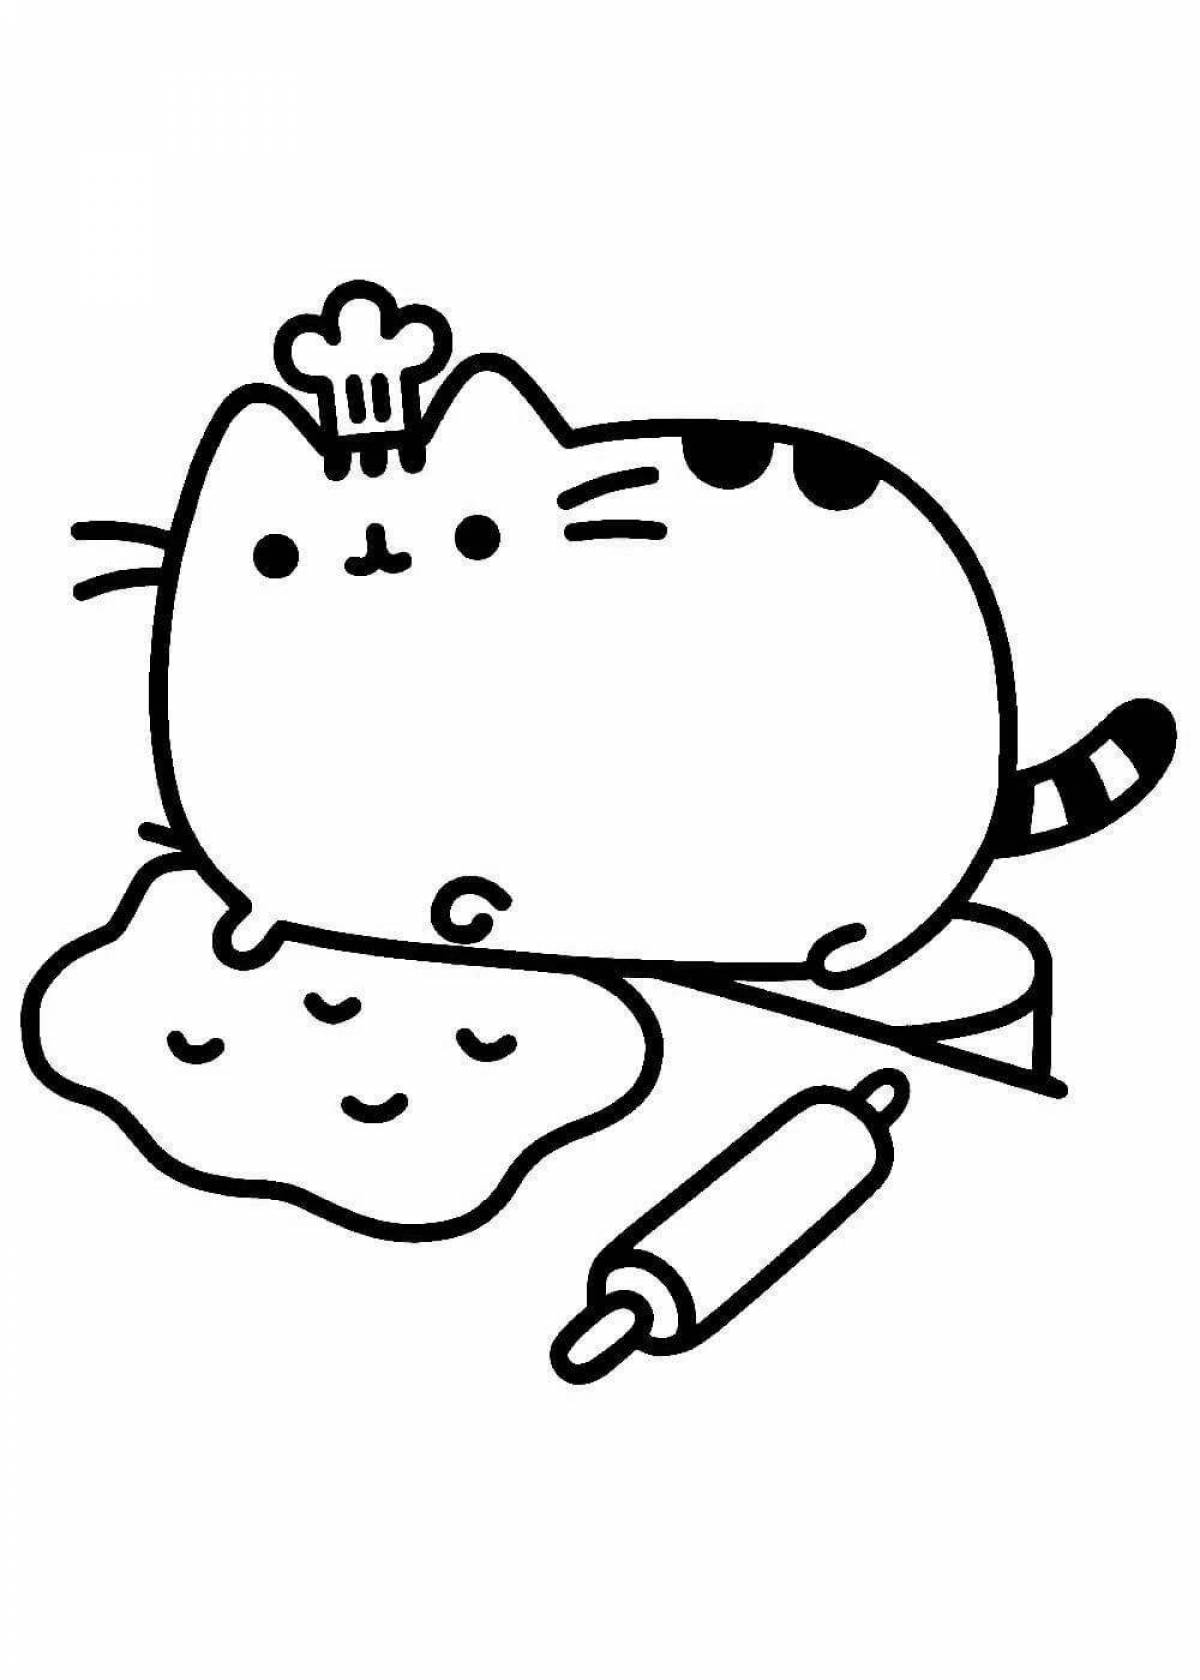 Coloring page grinning chubby cat